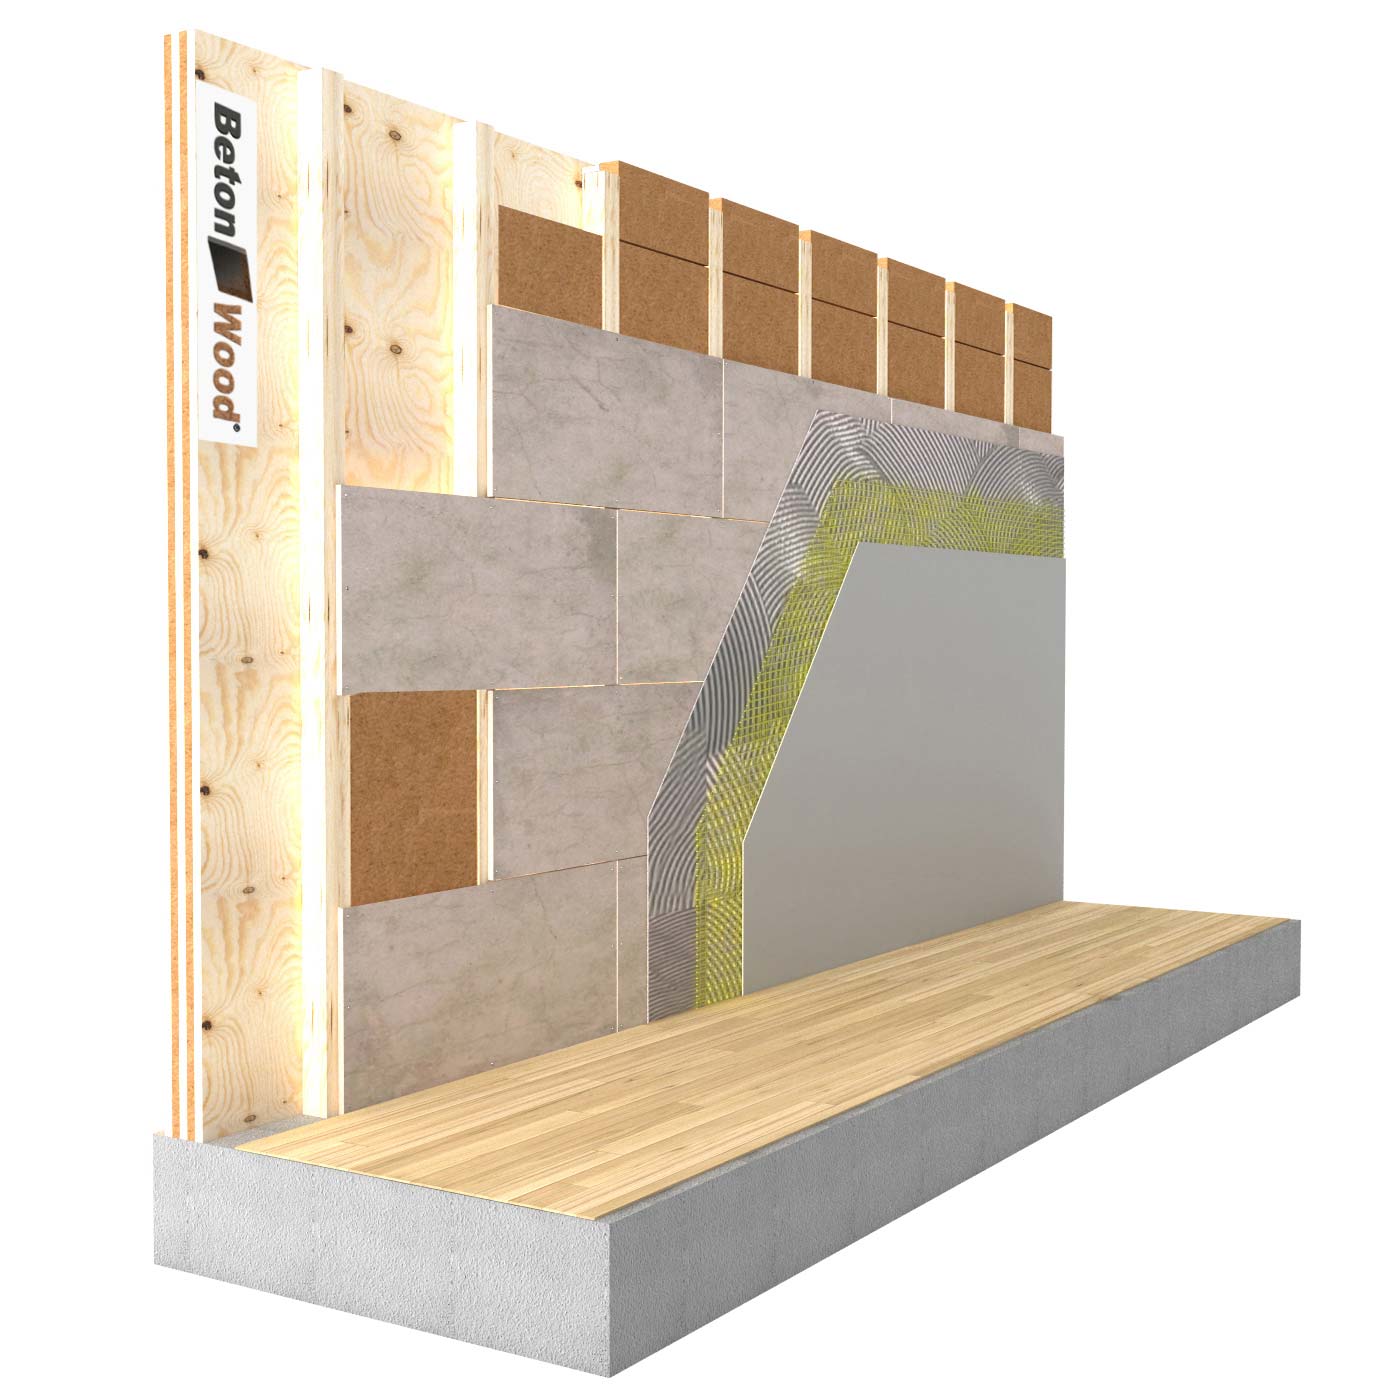 Internal insulation system in Protect Fiber wood shop and cement bonded particle board